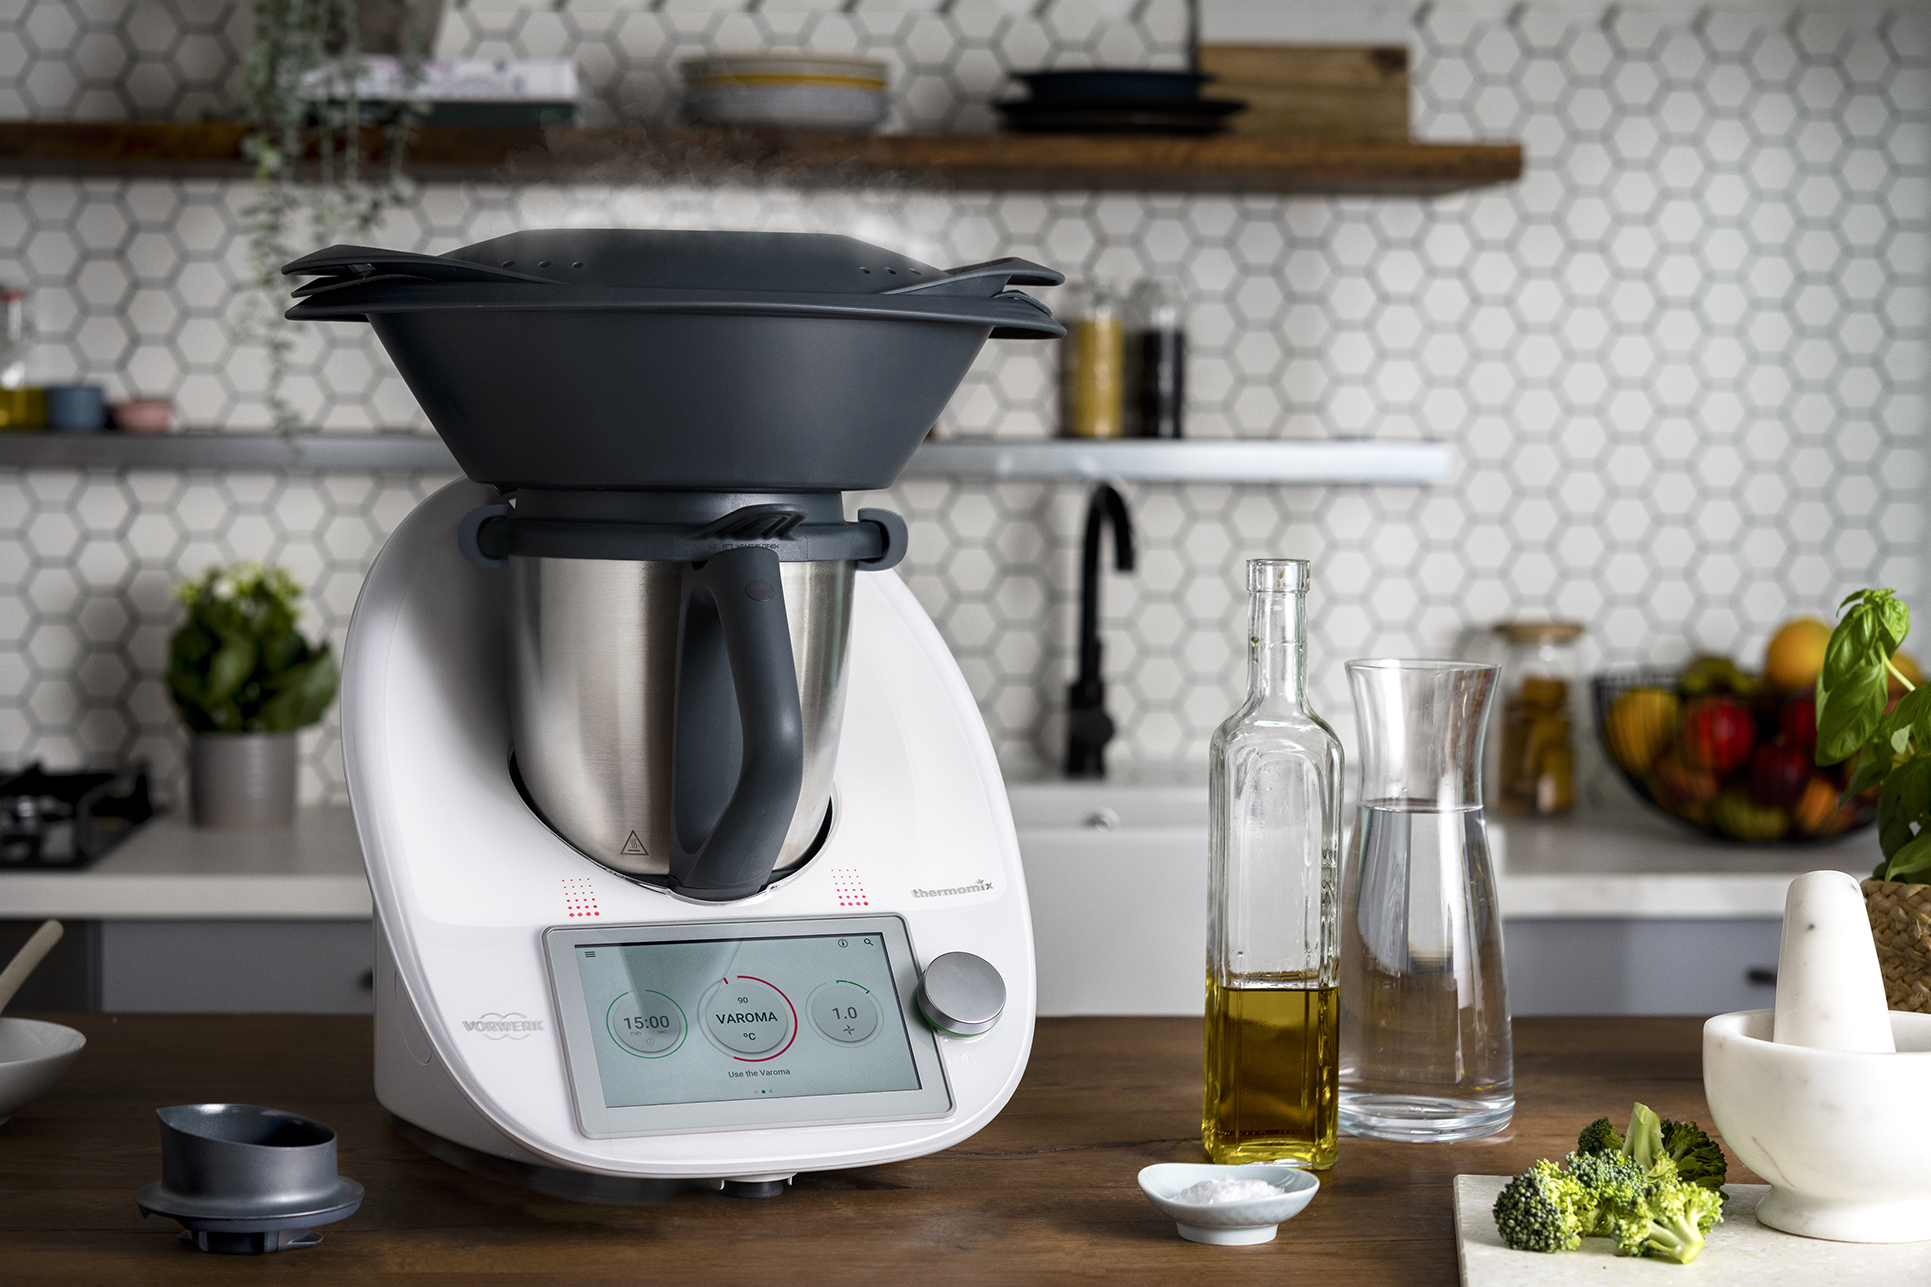 Thermomix issues safety notice about the TM5 and TM6